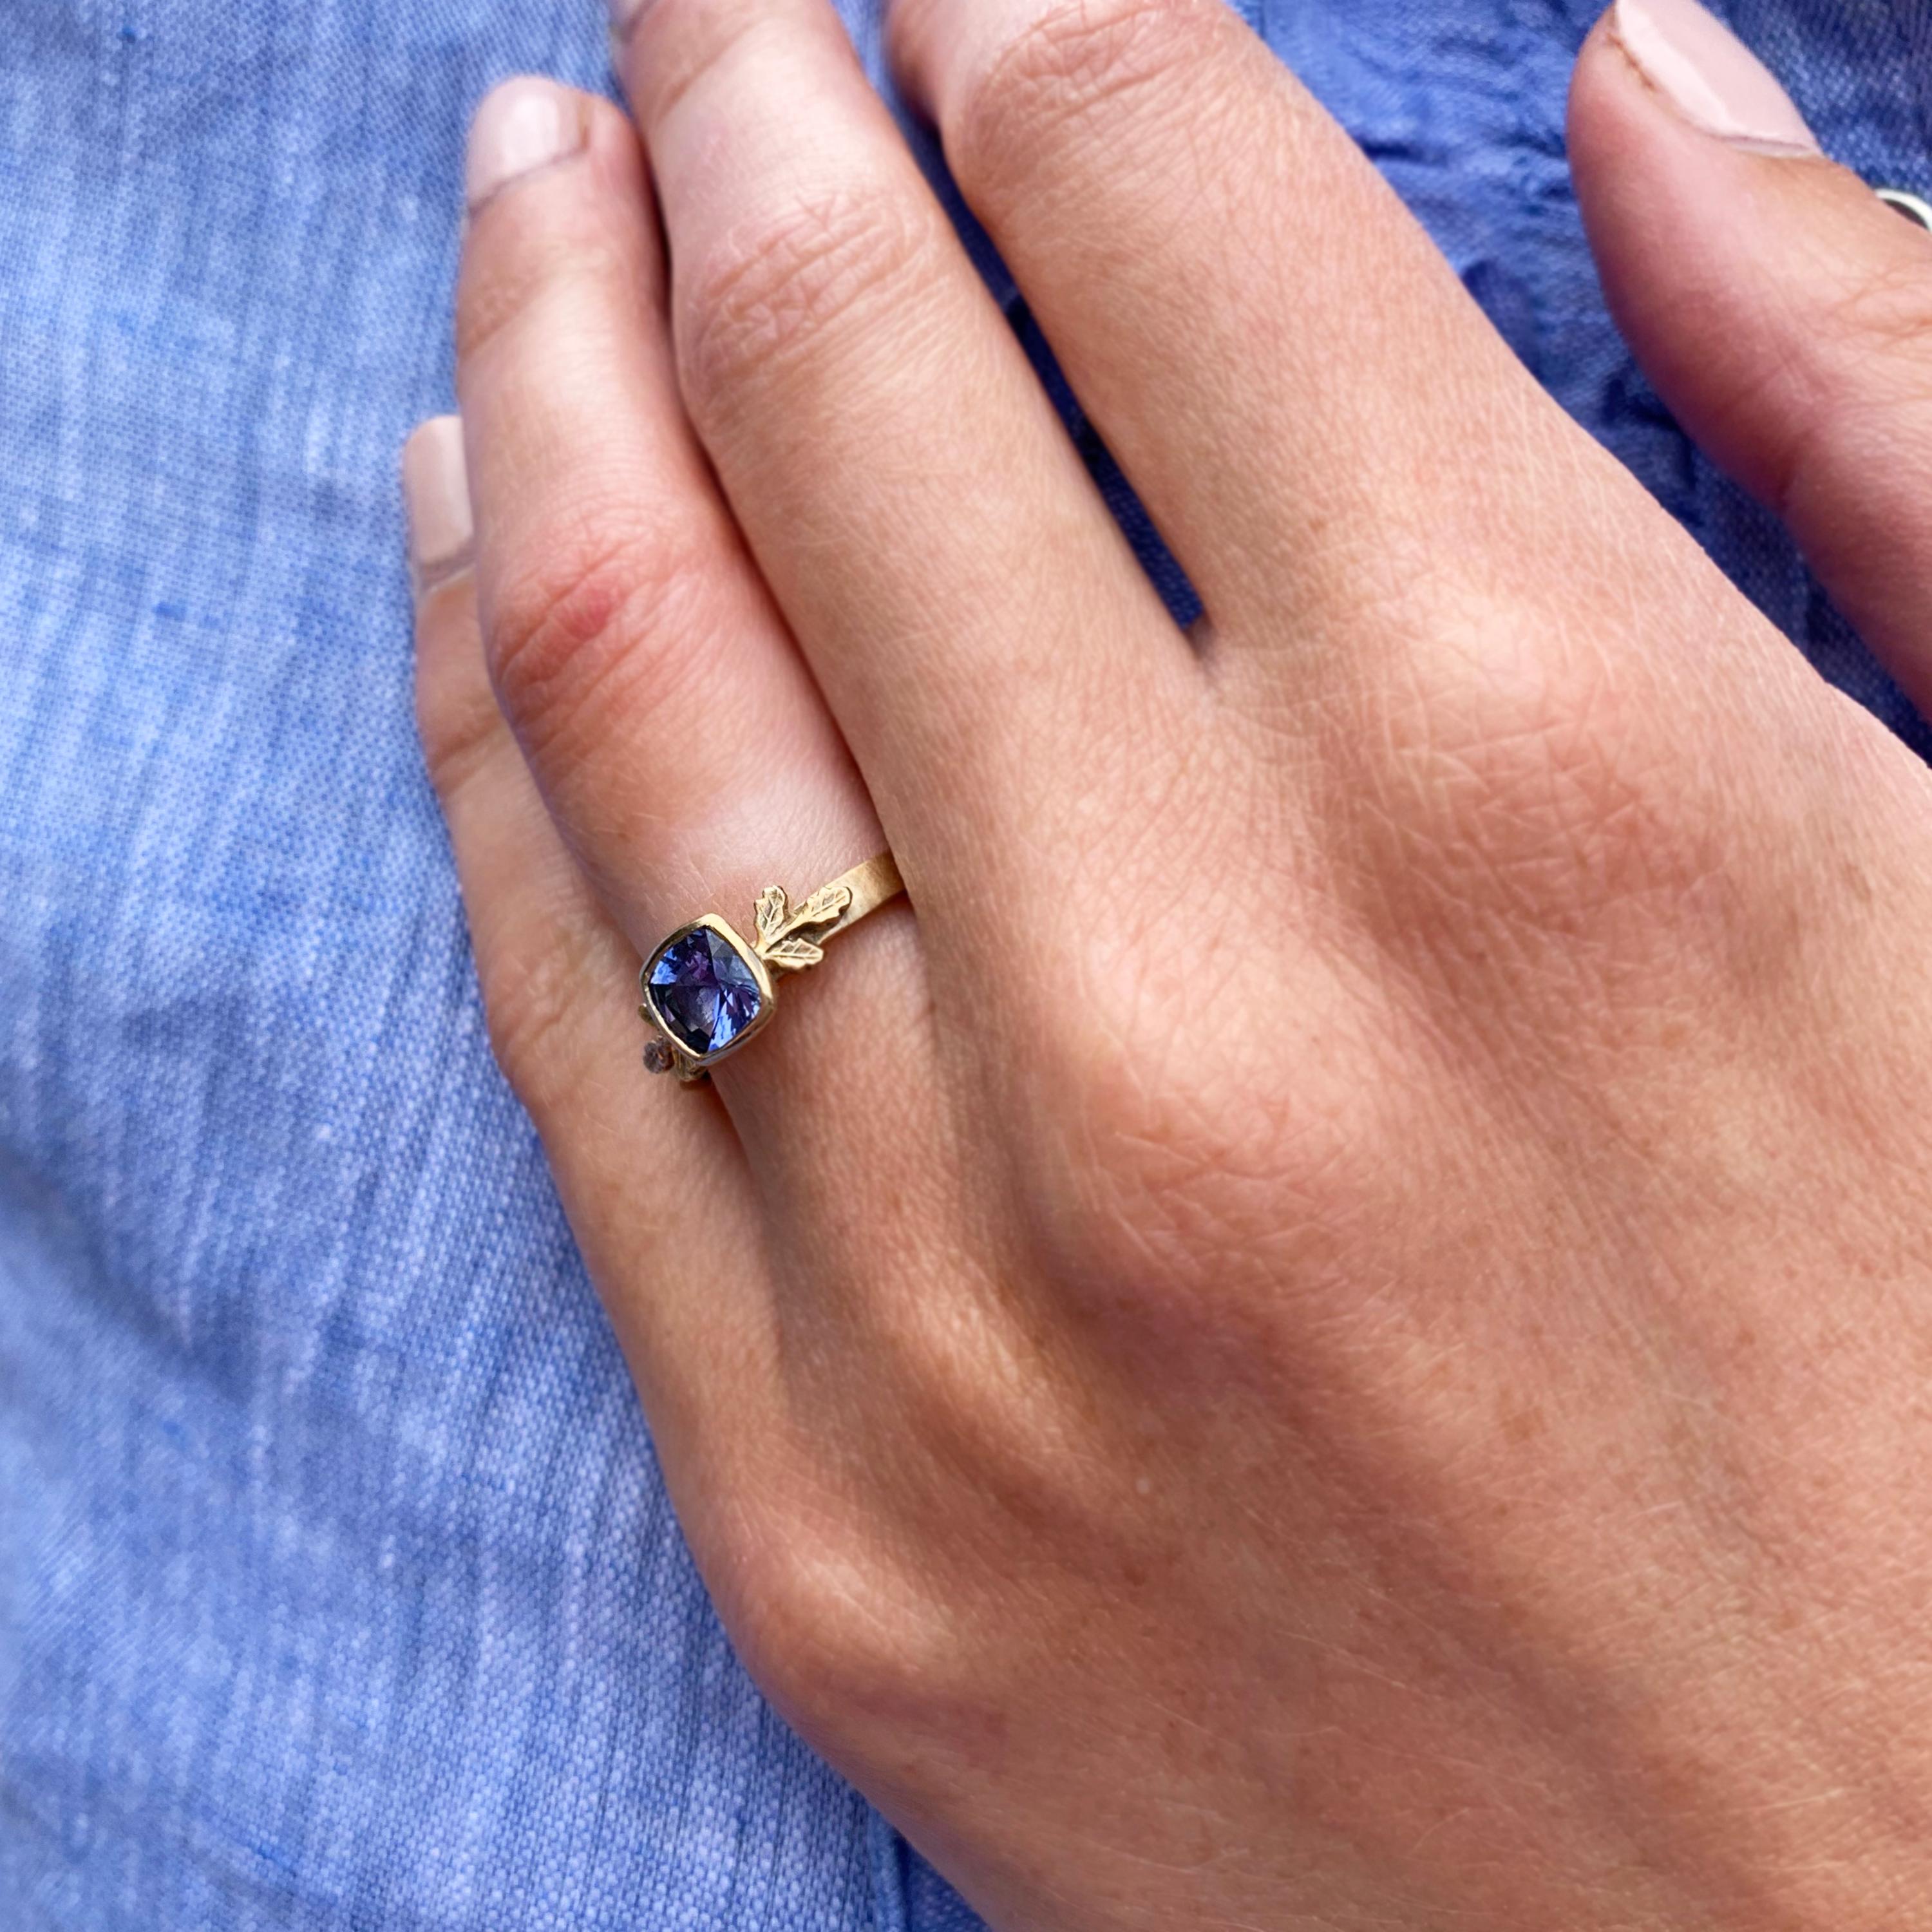 Women's Contemporary Blue Sapphire Solitaire Ring